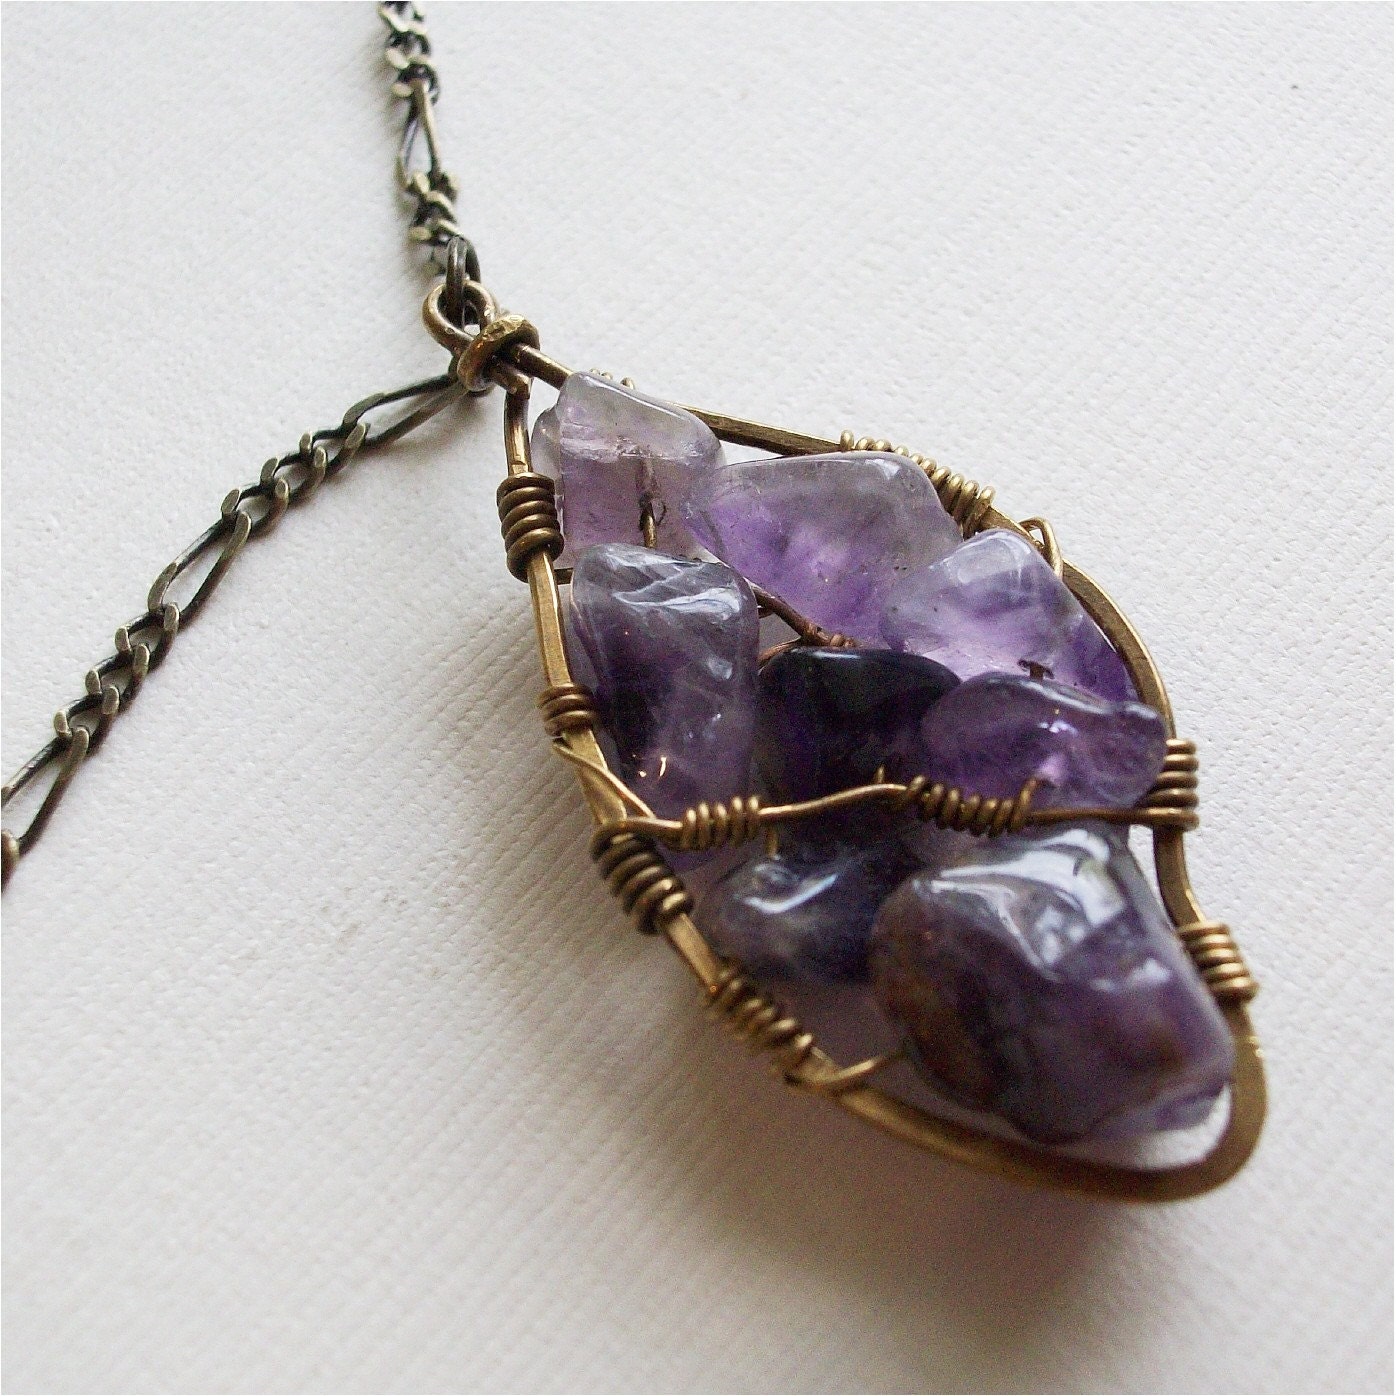 Purple Amethyst Leaf Necklace, handmade pendant on antiqued brass chain, FREE SHIPPING ETSY